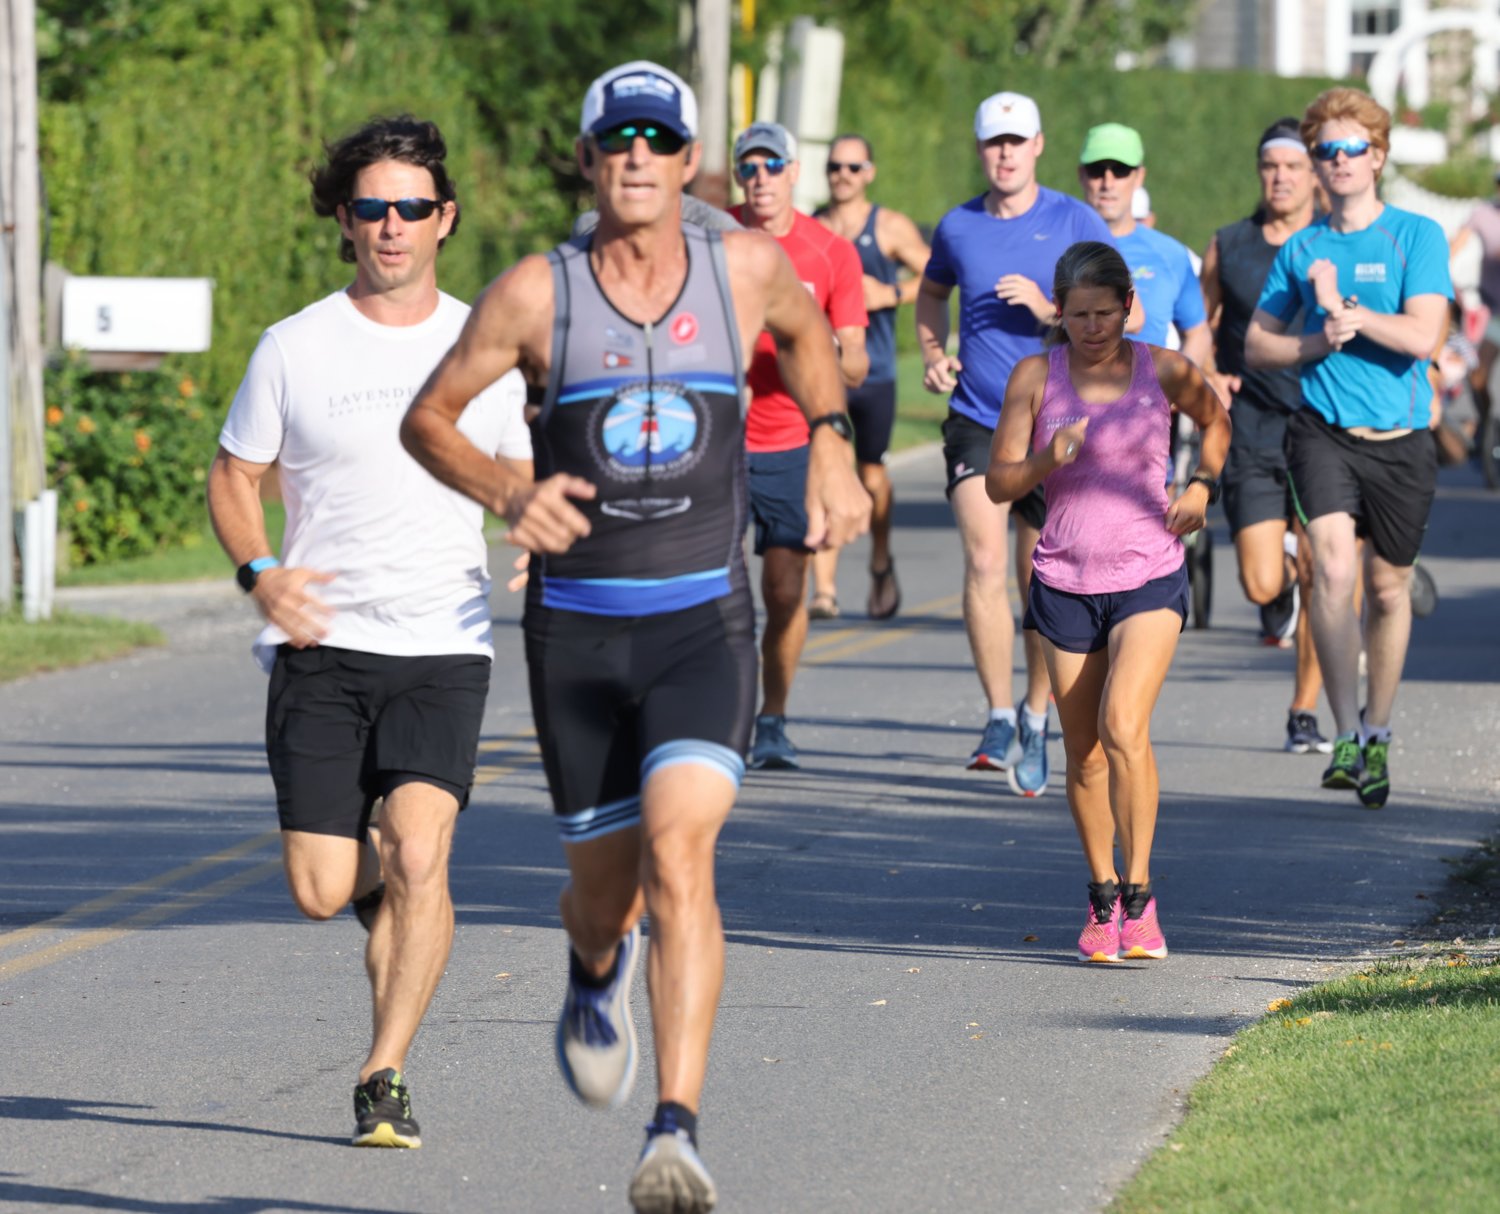 Jim Congdon leads the pack at Tuesday night's Brant Point Runners, but ultimately couldn't hold off Aidan McCormack.